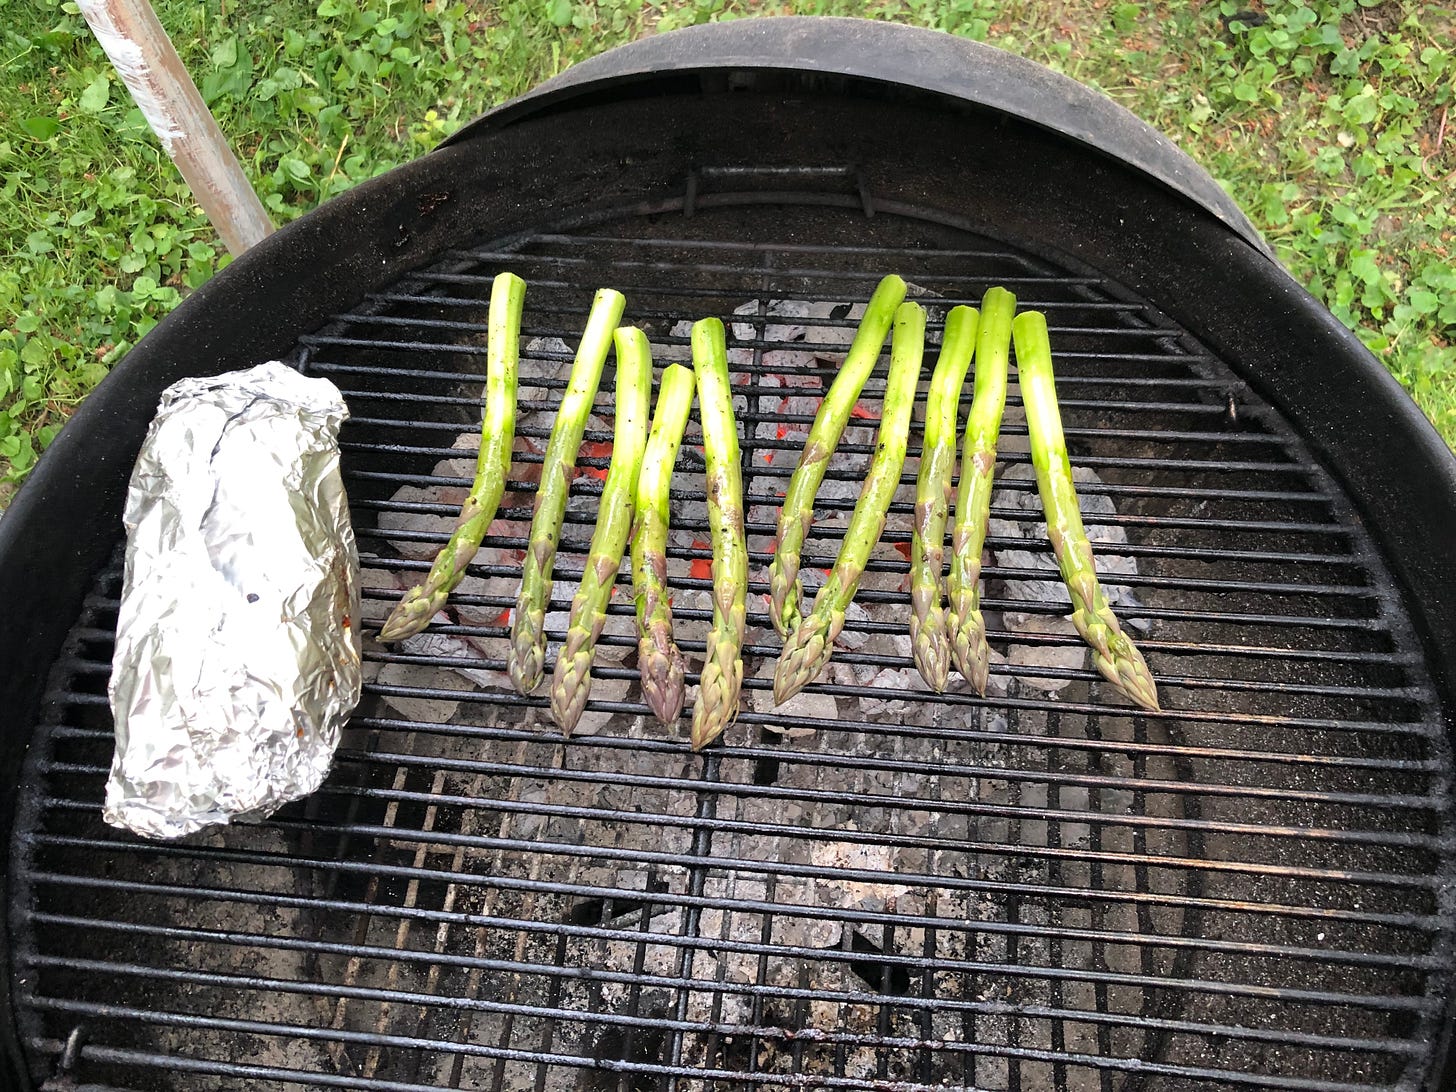 Asparagus grilling on a hot charcoal grill. Beside them on the grill is a foil packet.